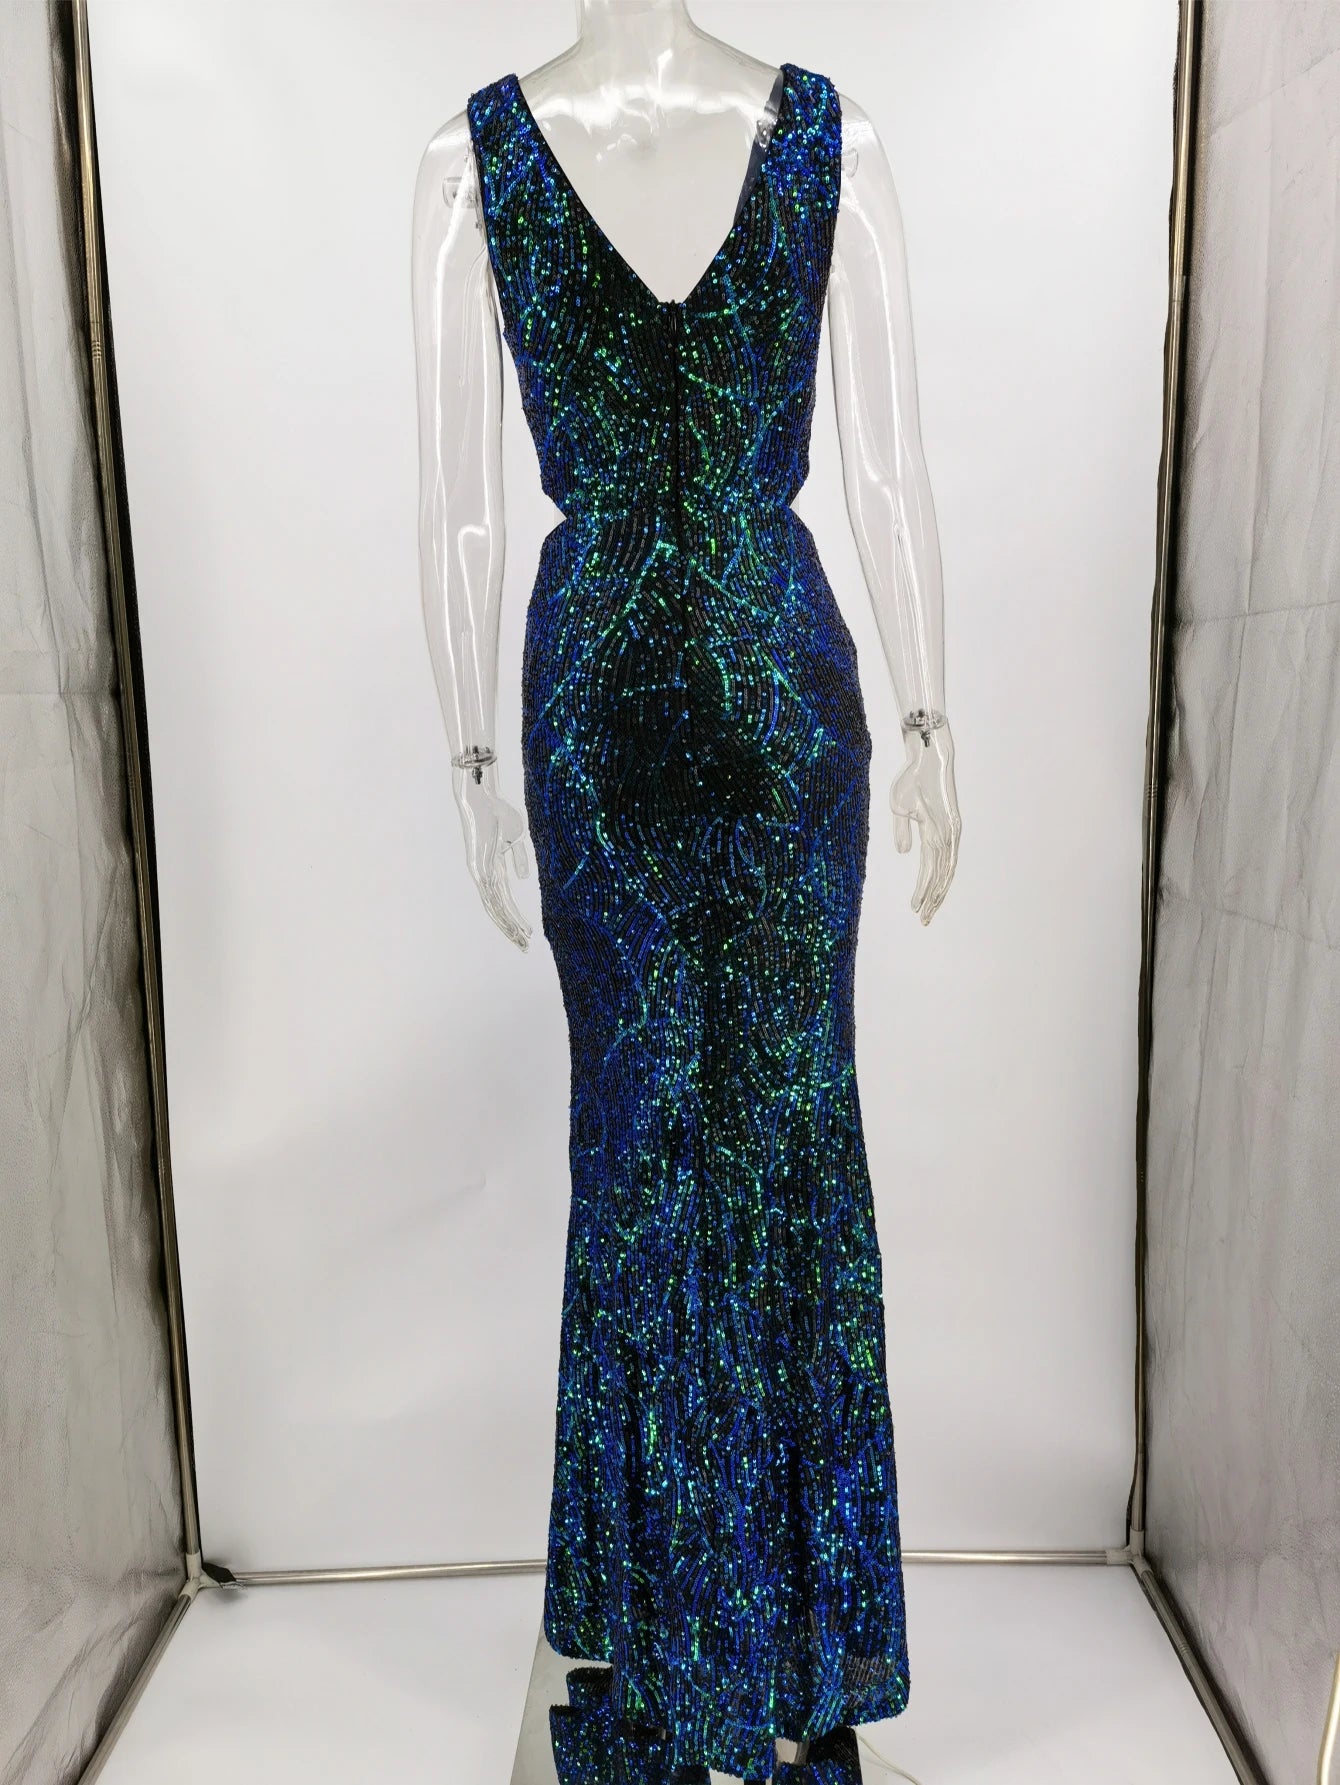 Sequin Hollow Side Sleeveless Maxi Dresses